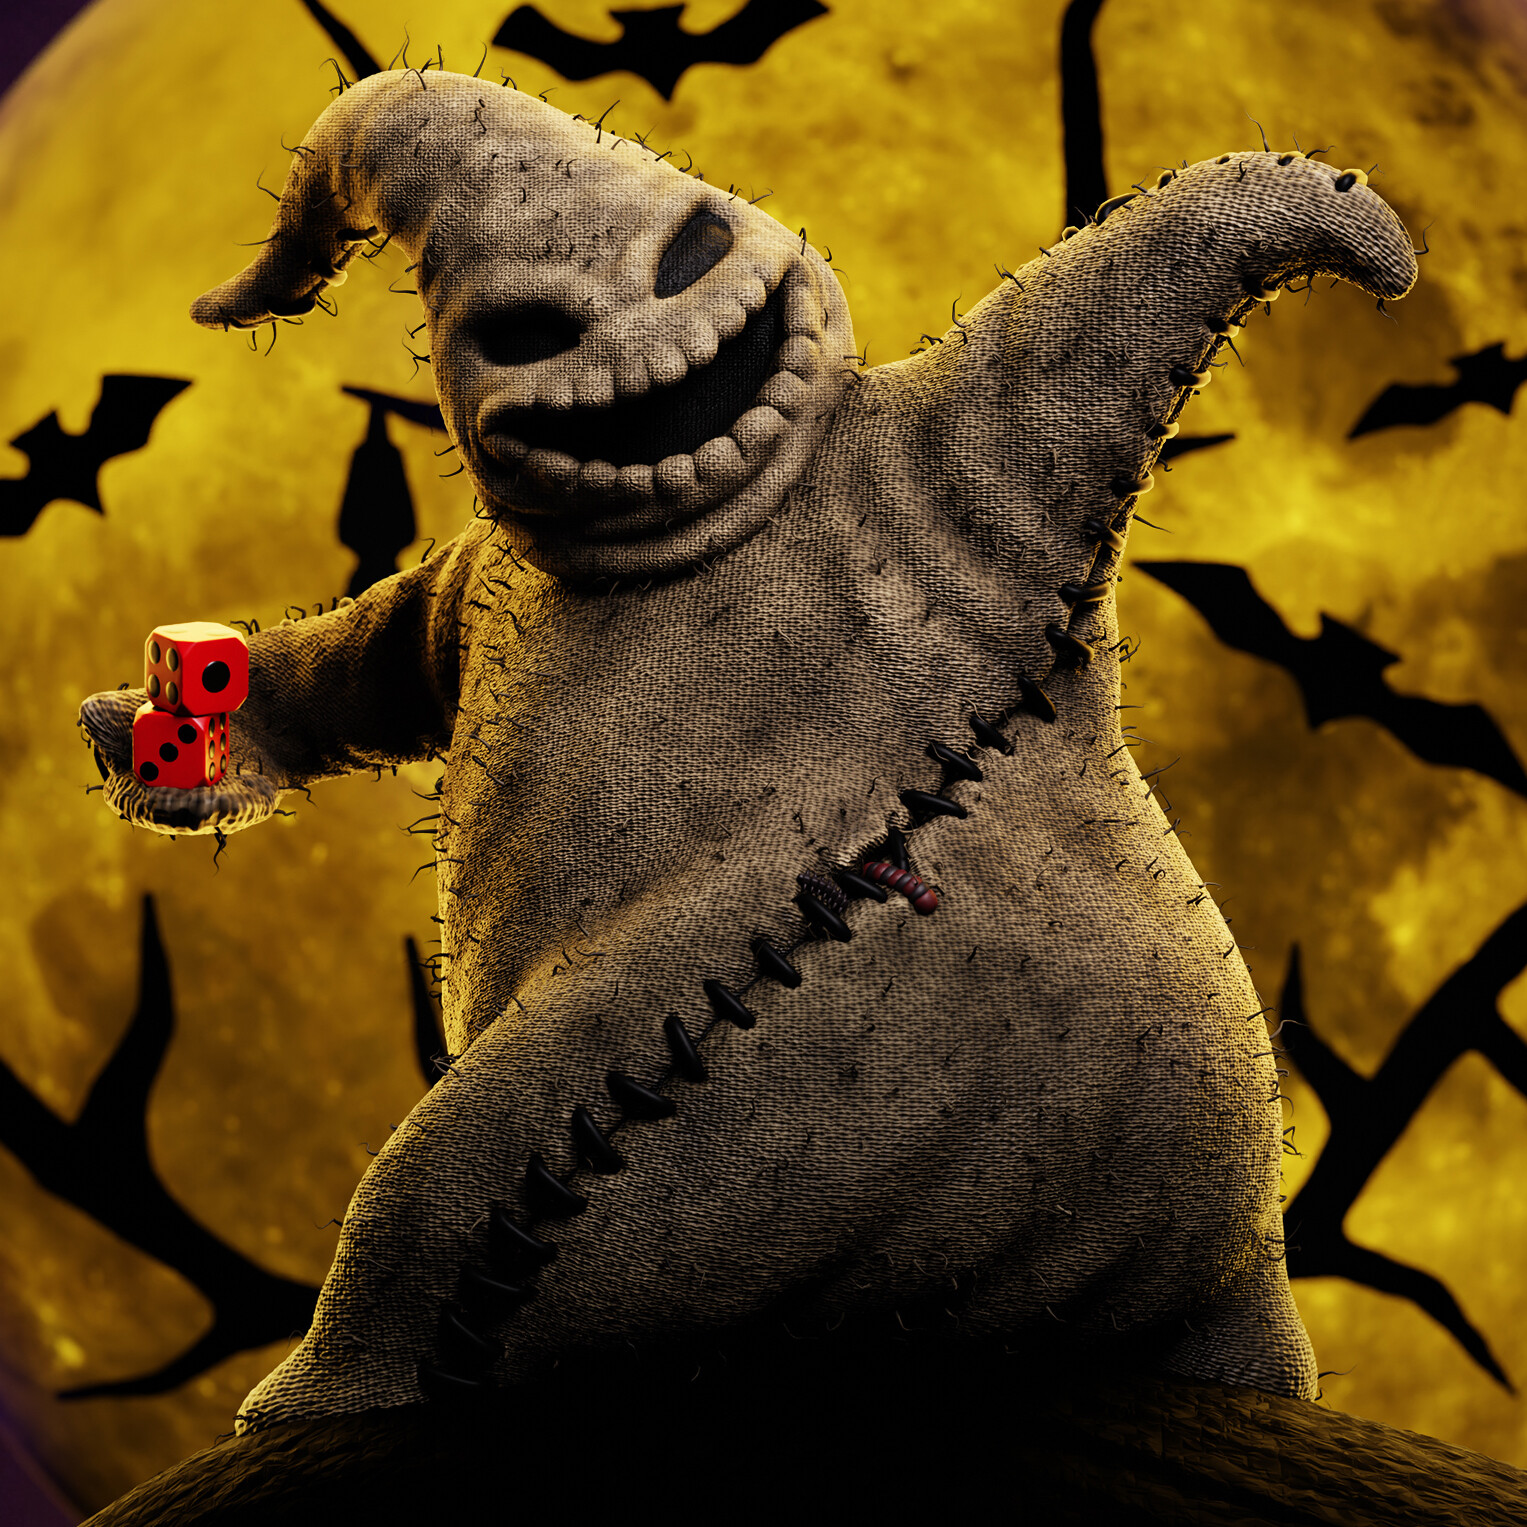 Oogie Boogie - Finished Projects - Blender Artists Community